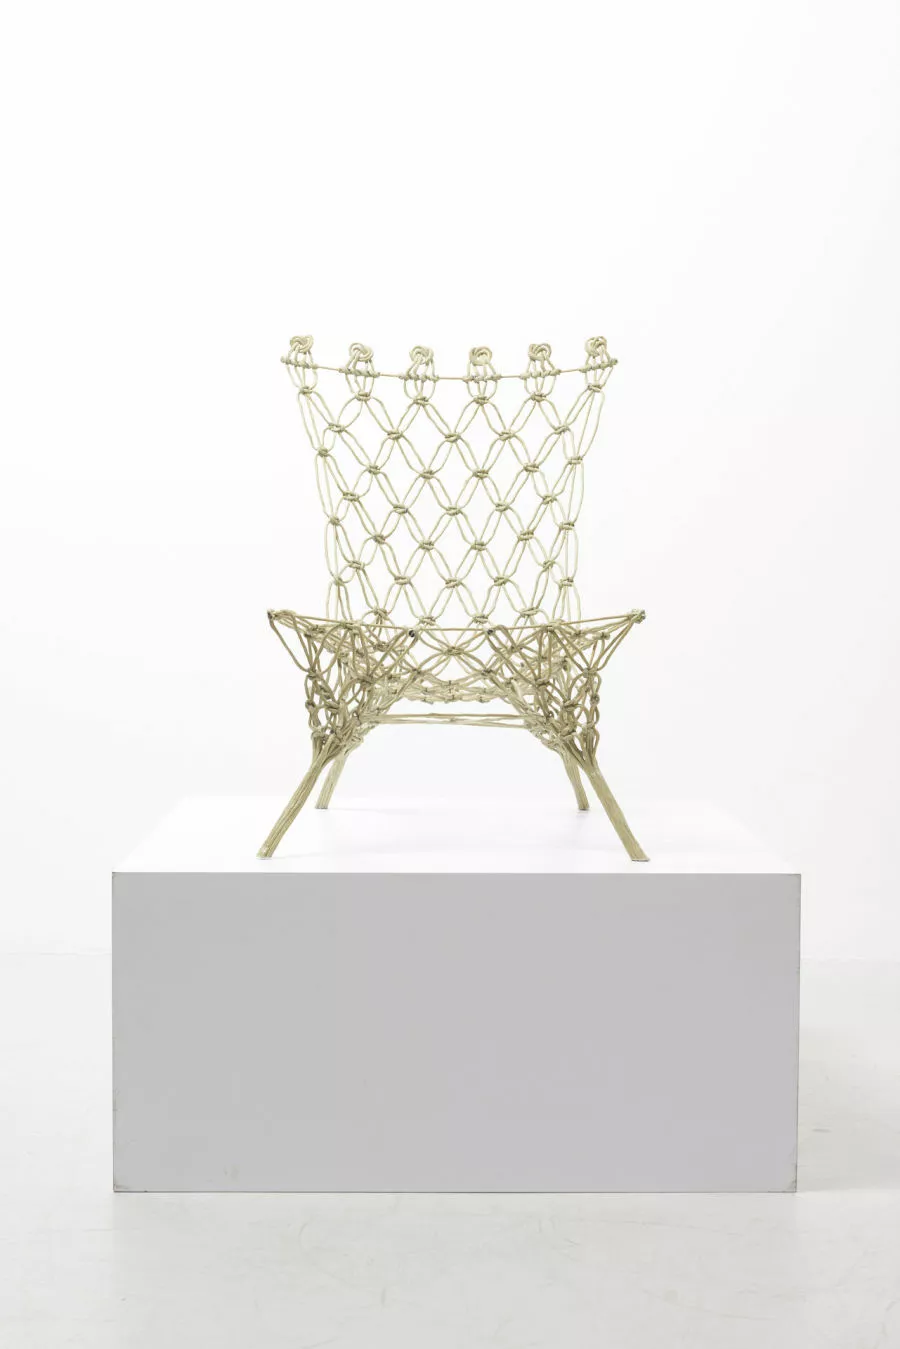 Marcel Wanders: Knotted Chair, Vignelli Center